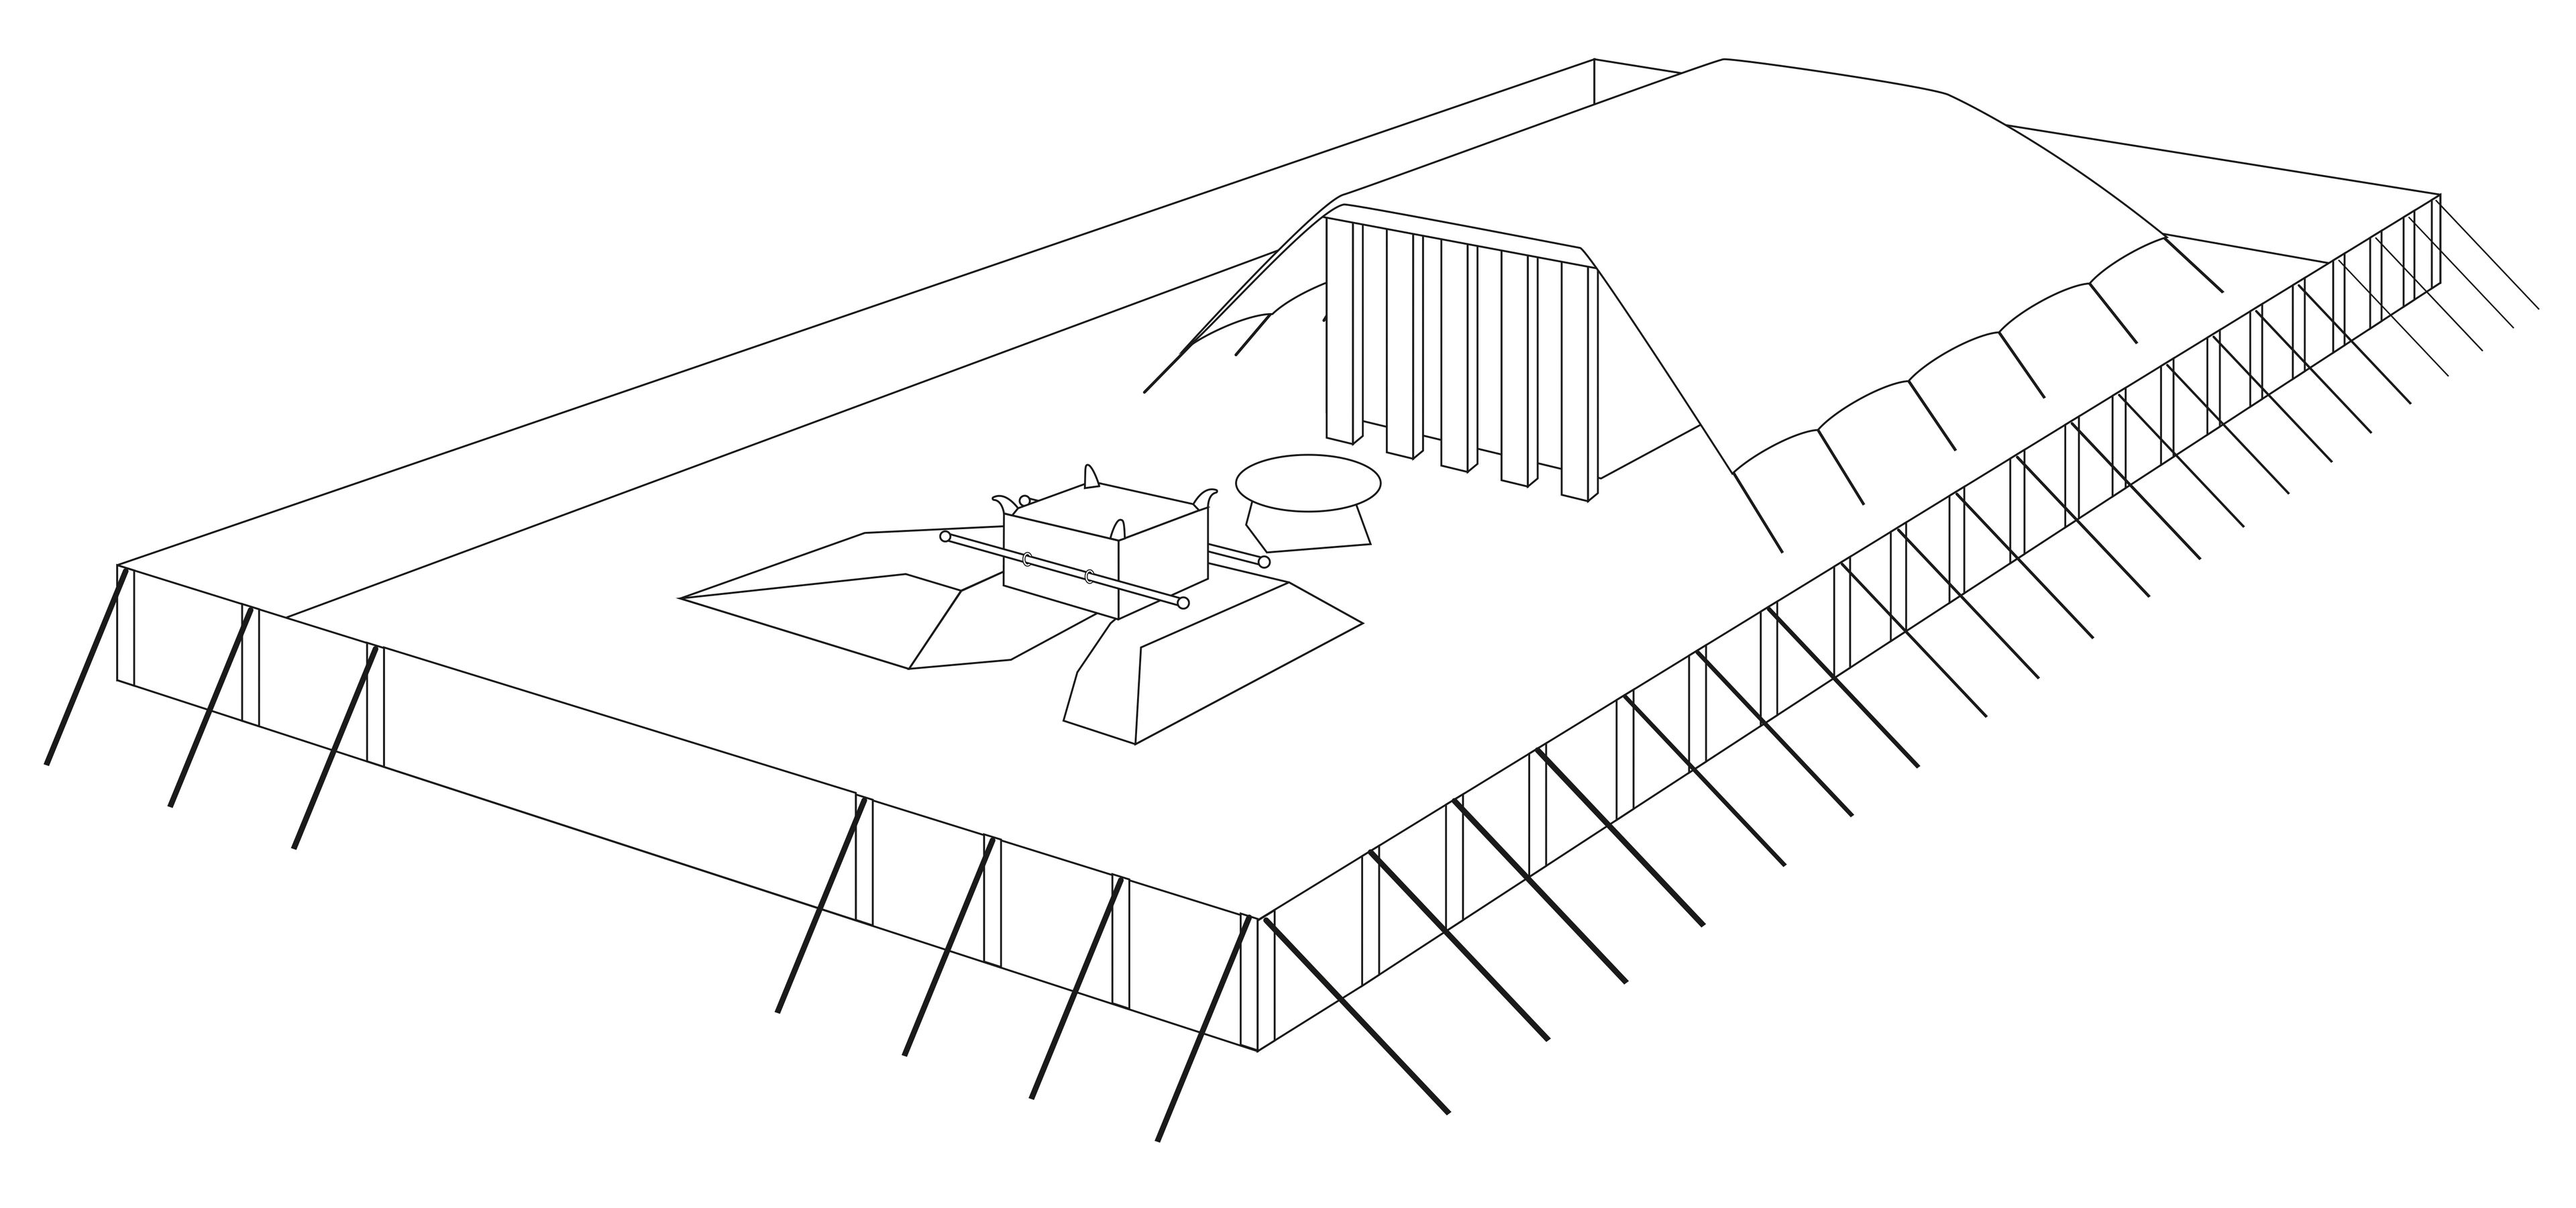 A line drawing by Jeremy Beck depicting the tabernacle in the wilderness.